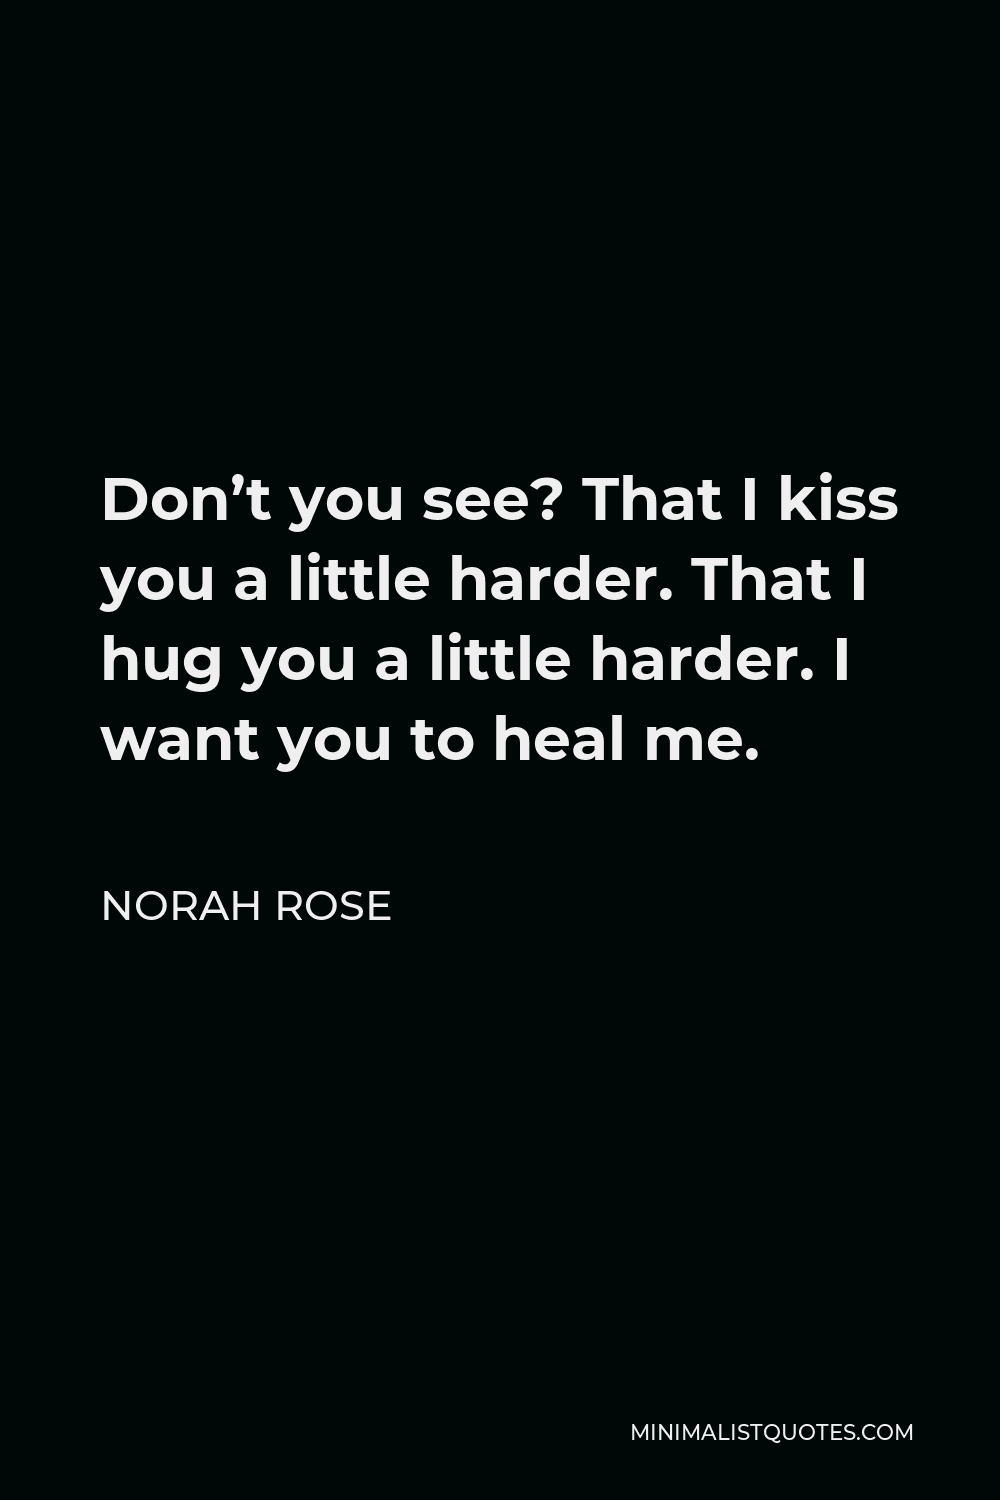 Norah Rose Quote - Don’t you see? That I kiss you a little harder. That I hug you a little harder. I want you to heal me.